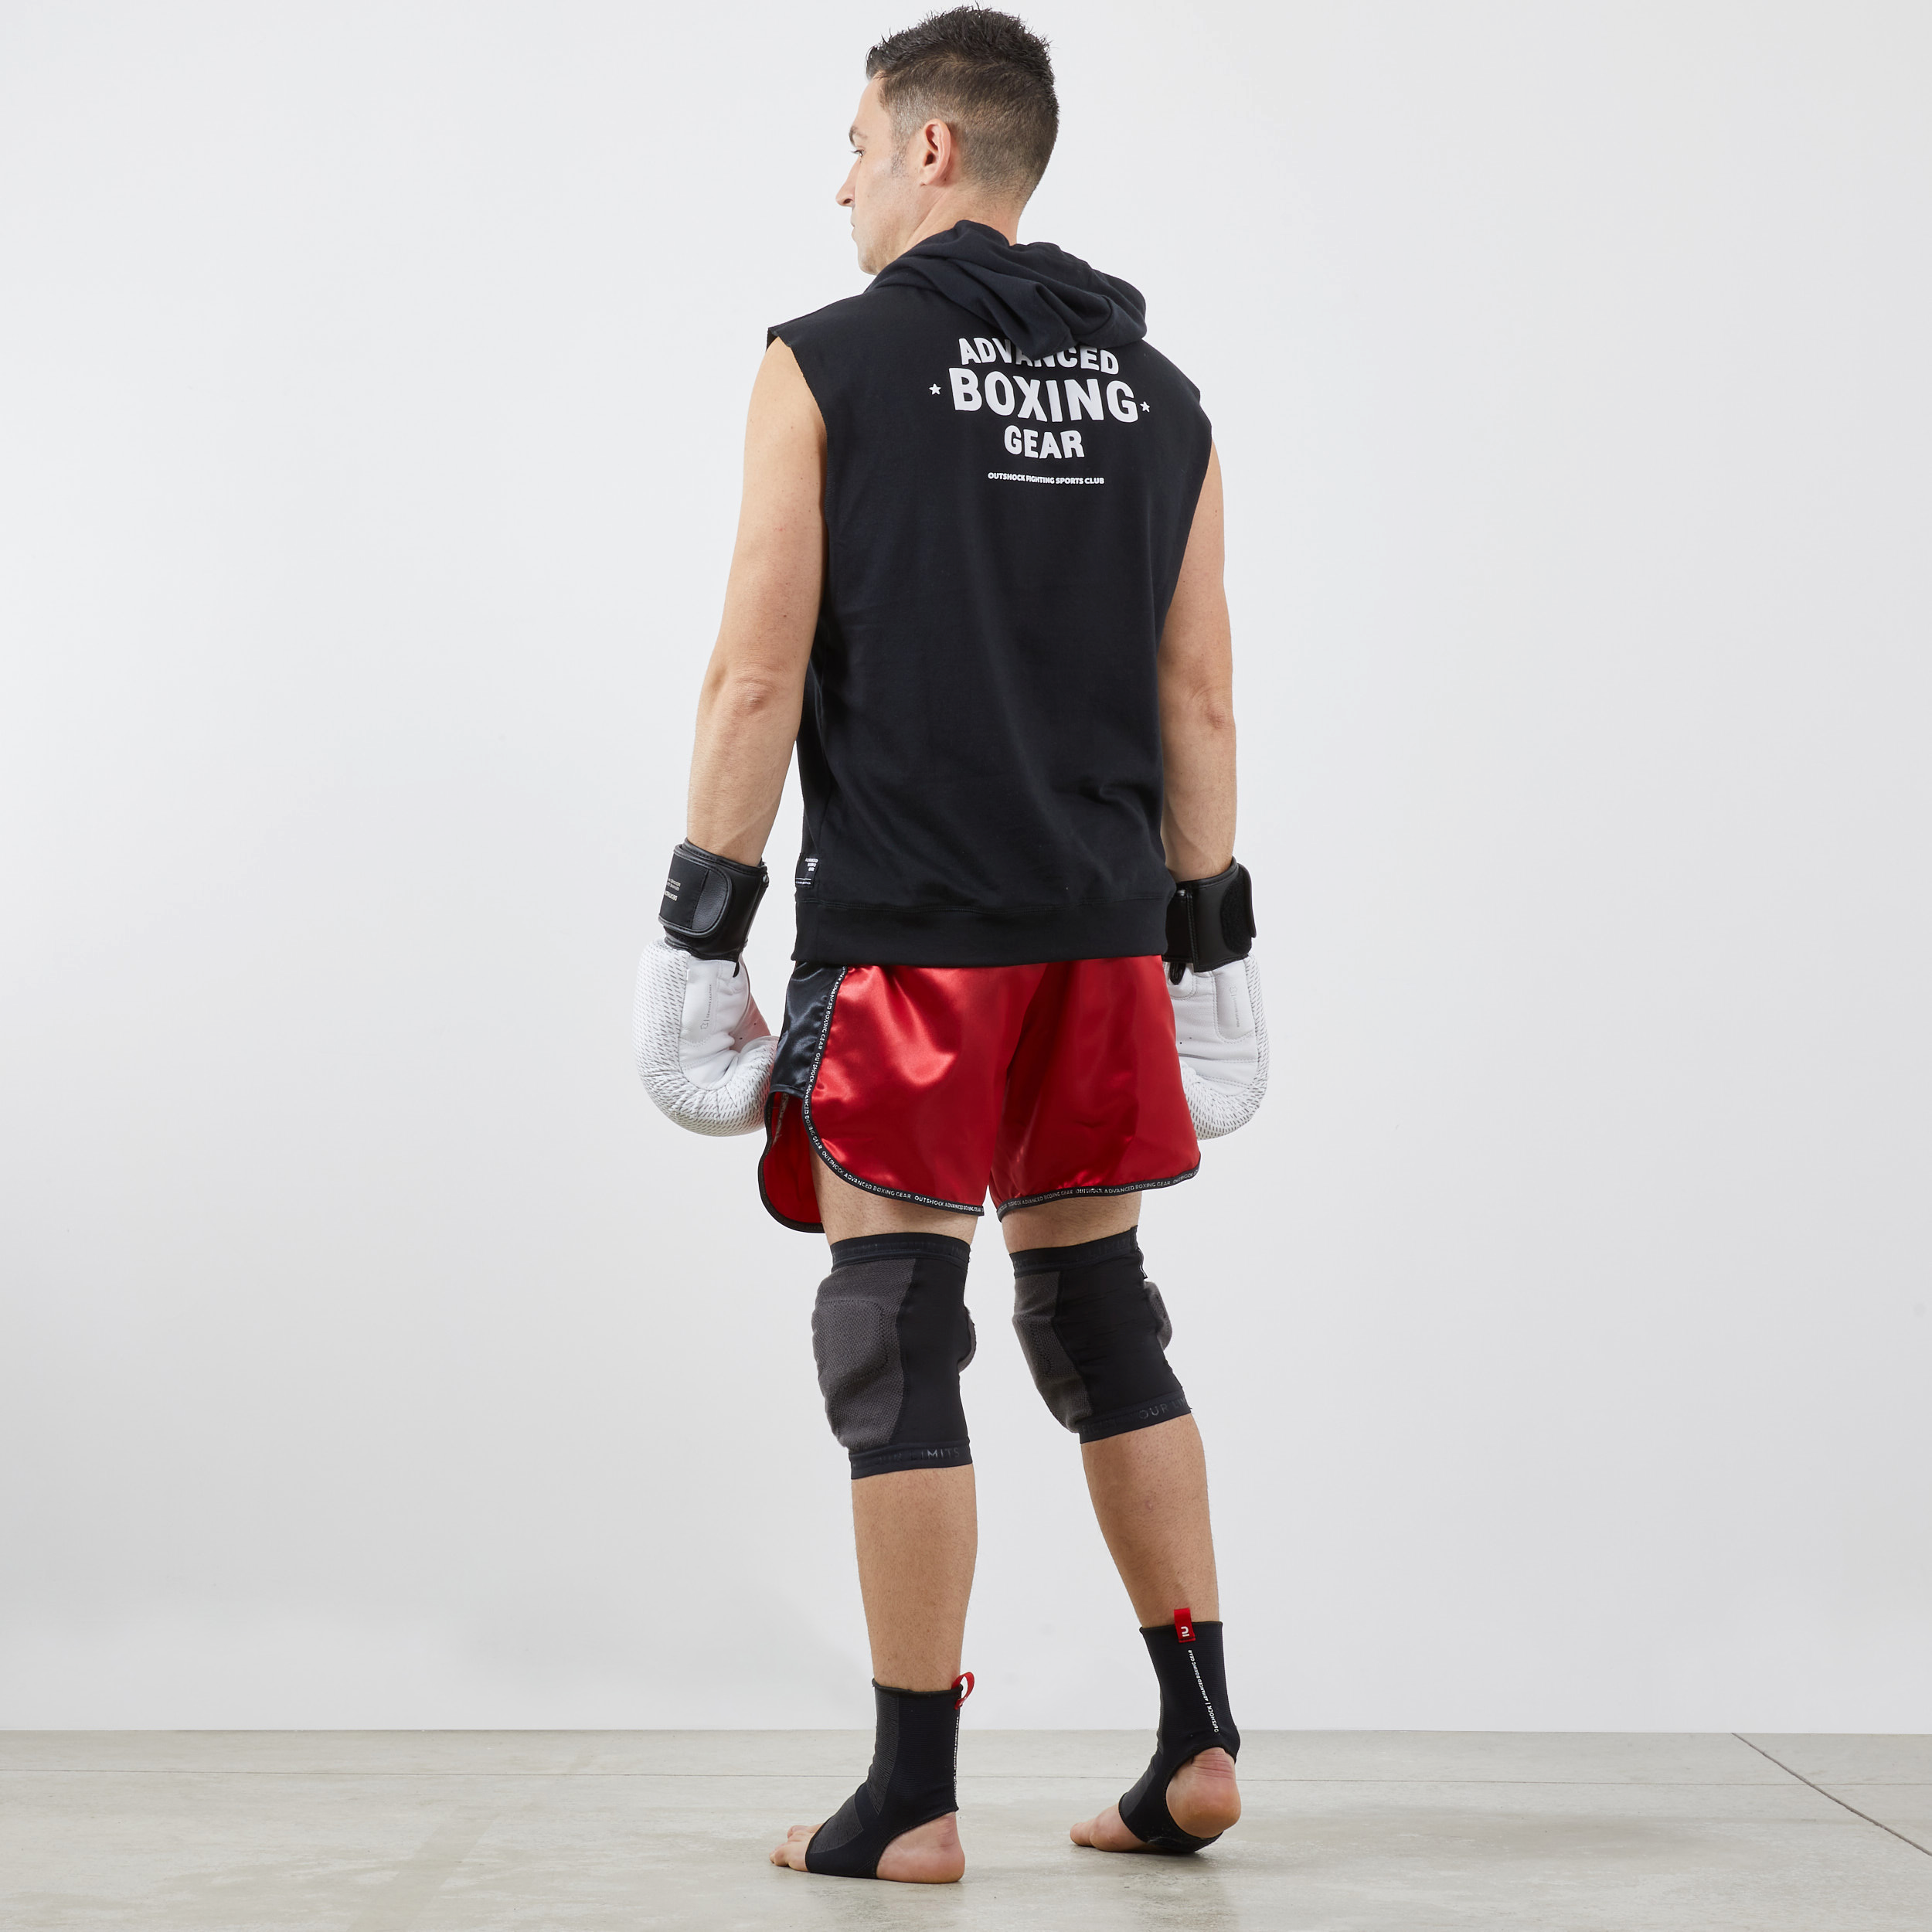 EVO Fitness Genouillères Protection Genoux MMA Volleyball Arts Martiaux  Kickboxing Muay Thai Lutte - S/M